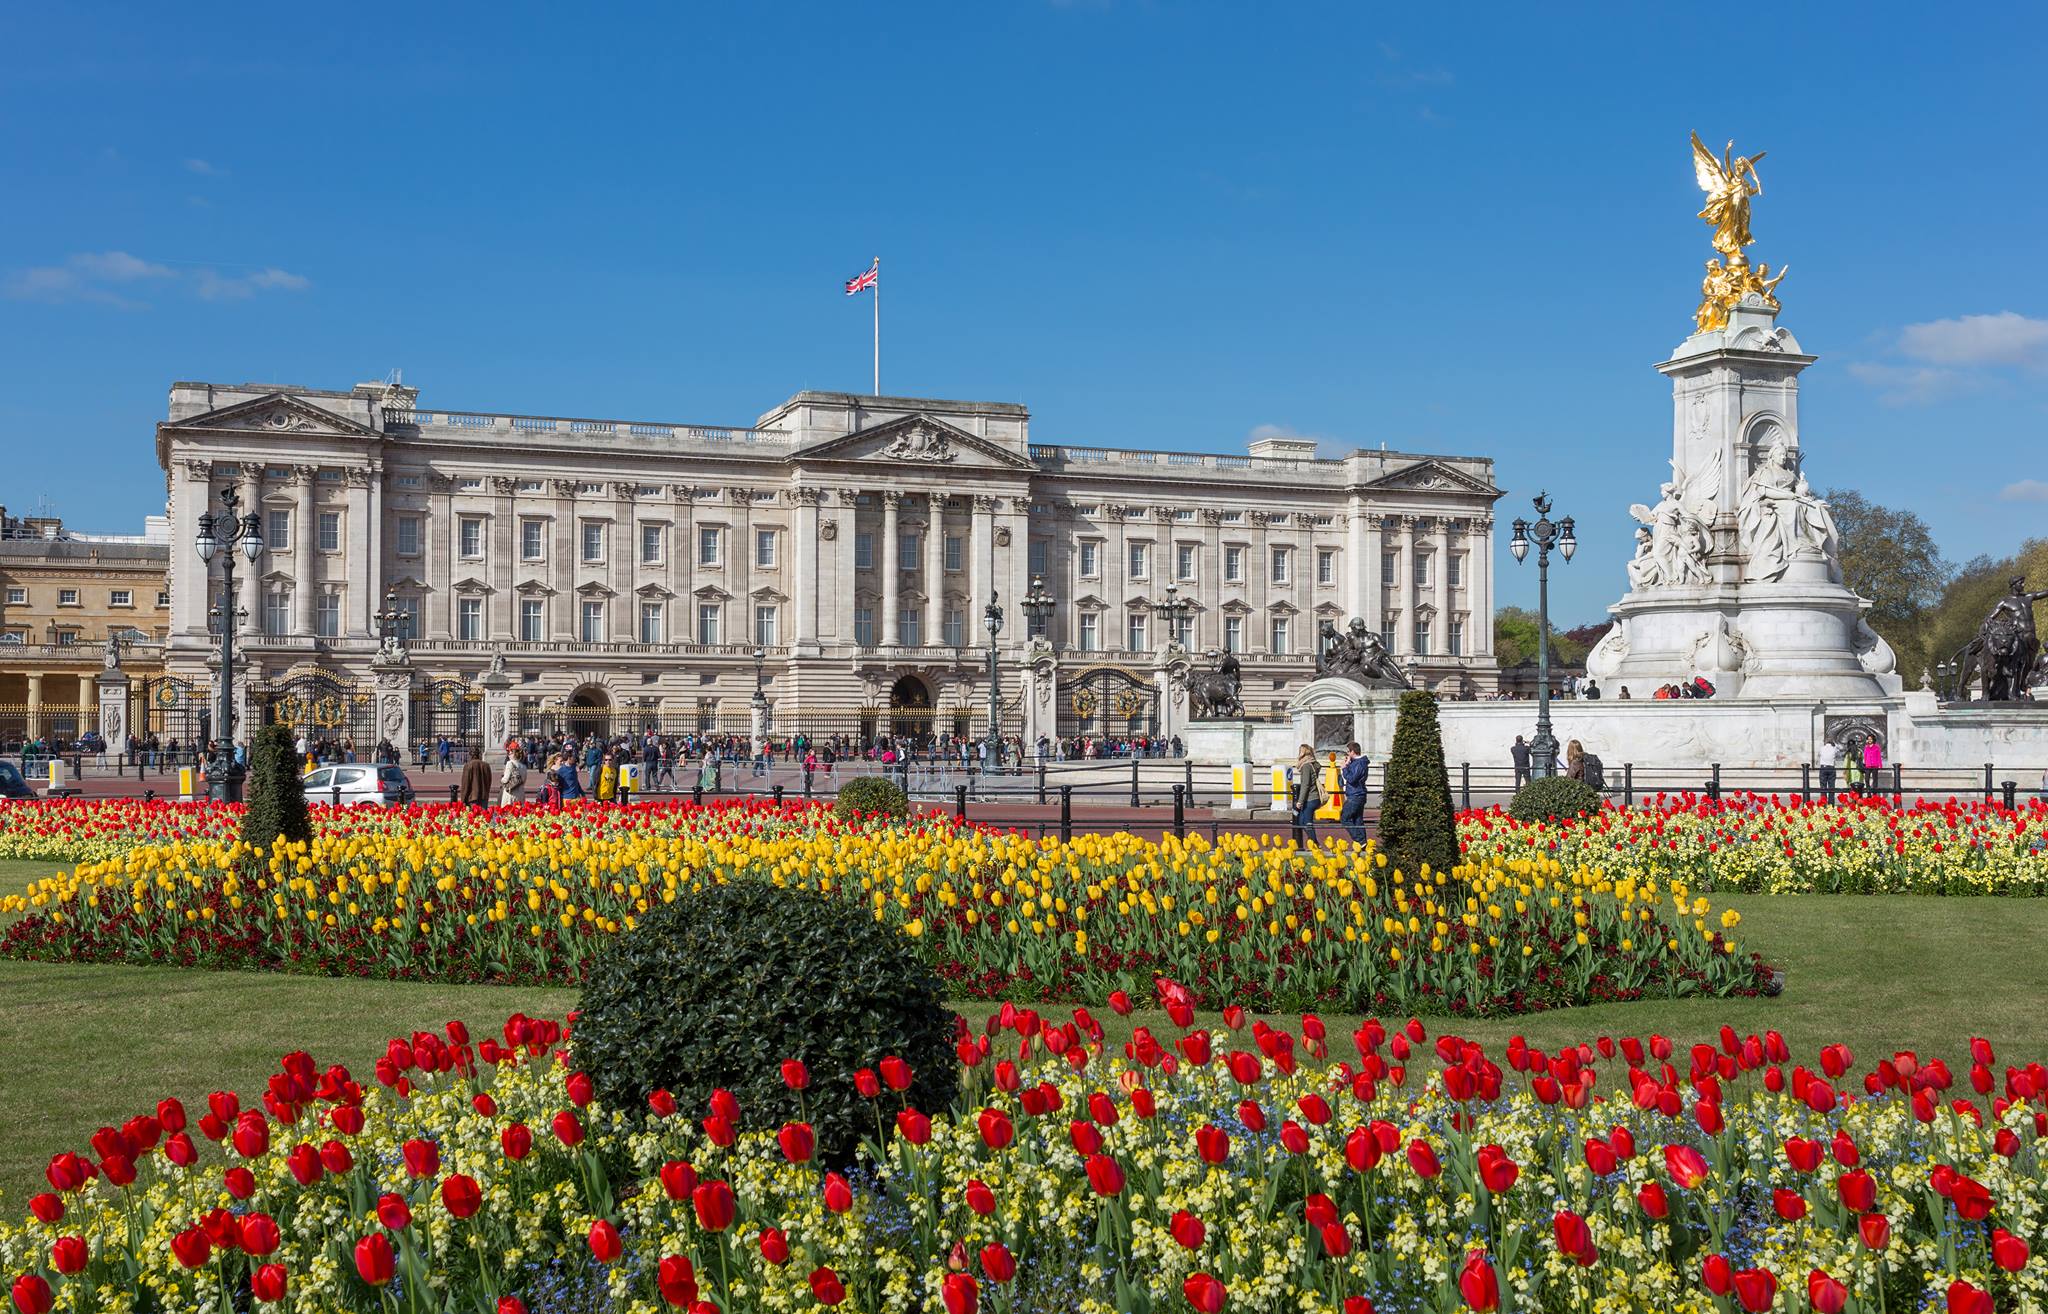 Buckingham Palace Private Apartments Scene Therapy